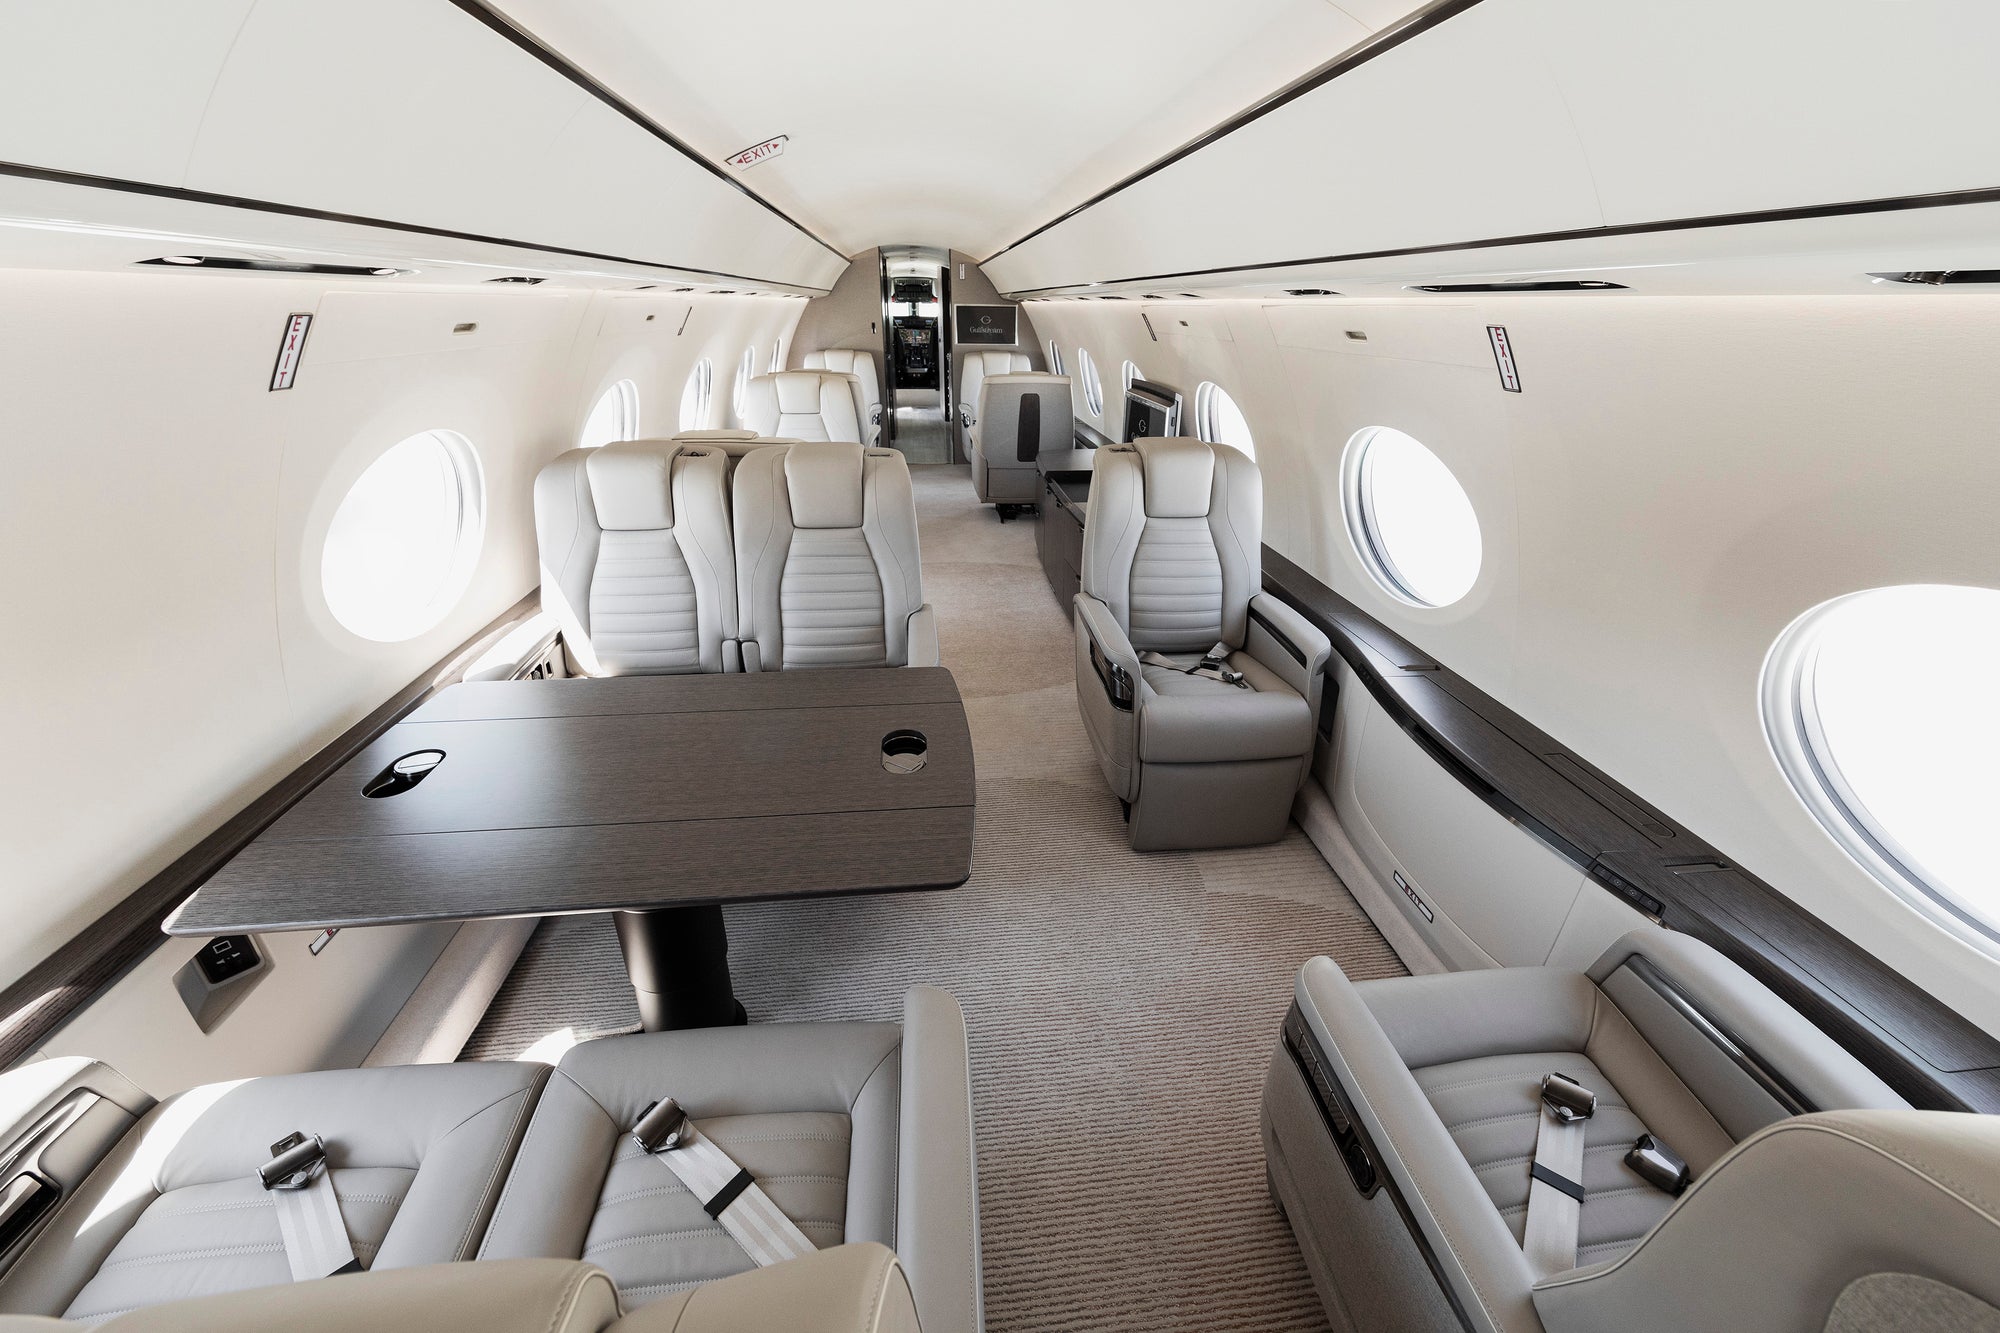 GULFSTREAM FLIES FIRST FULLY OUTFITTED G700